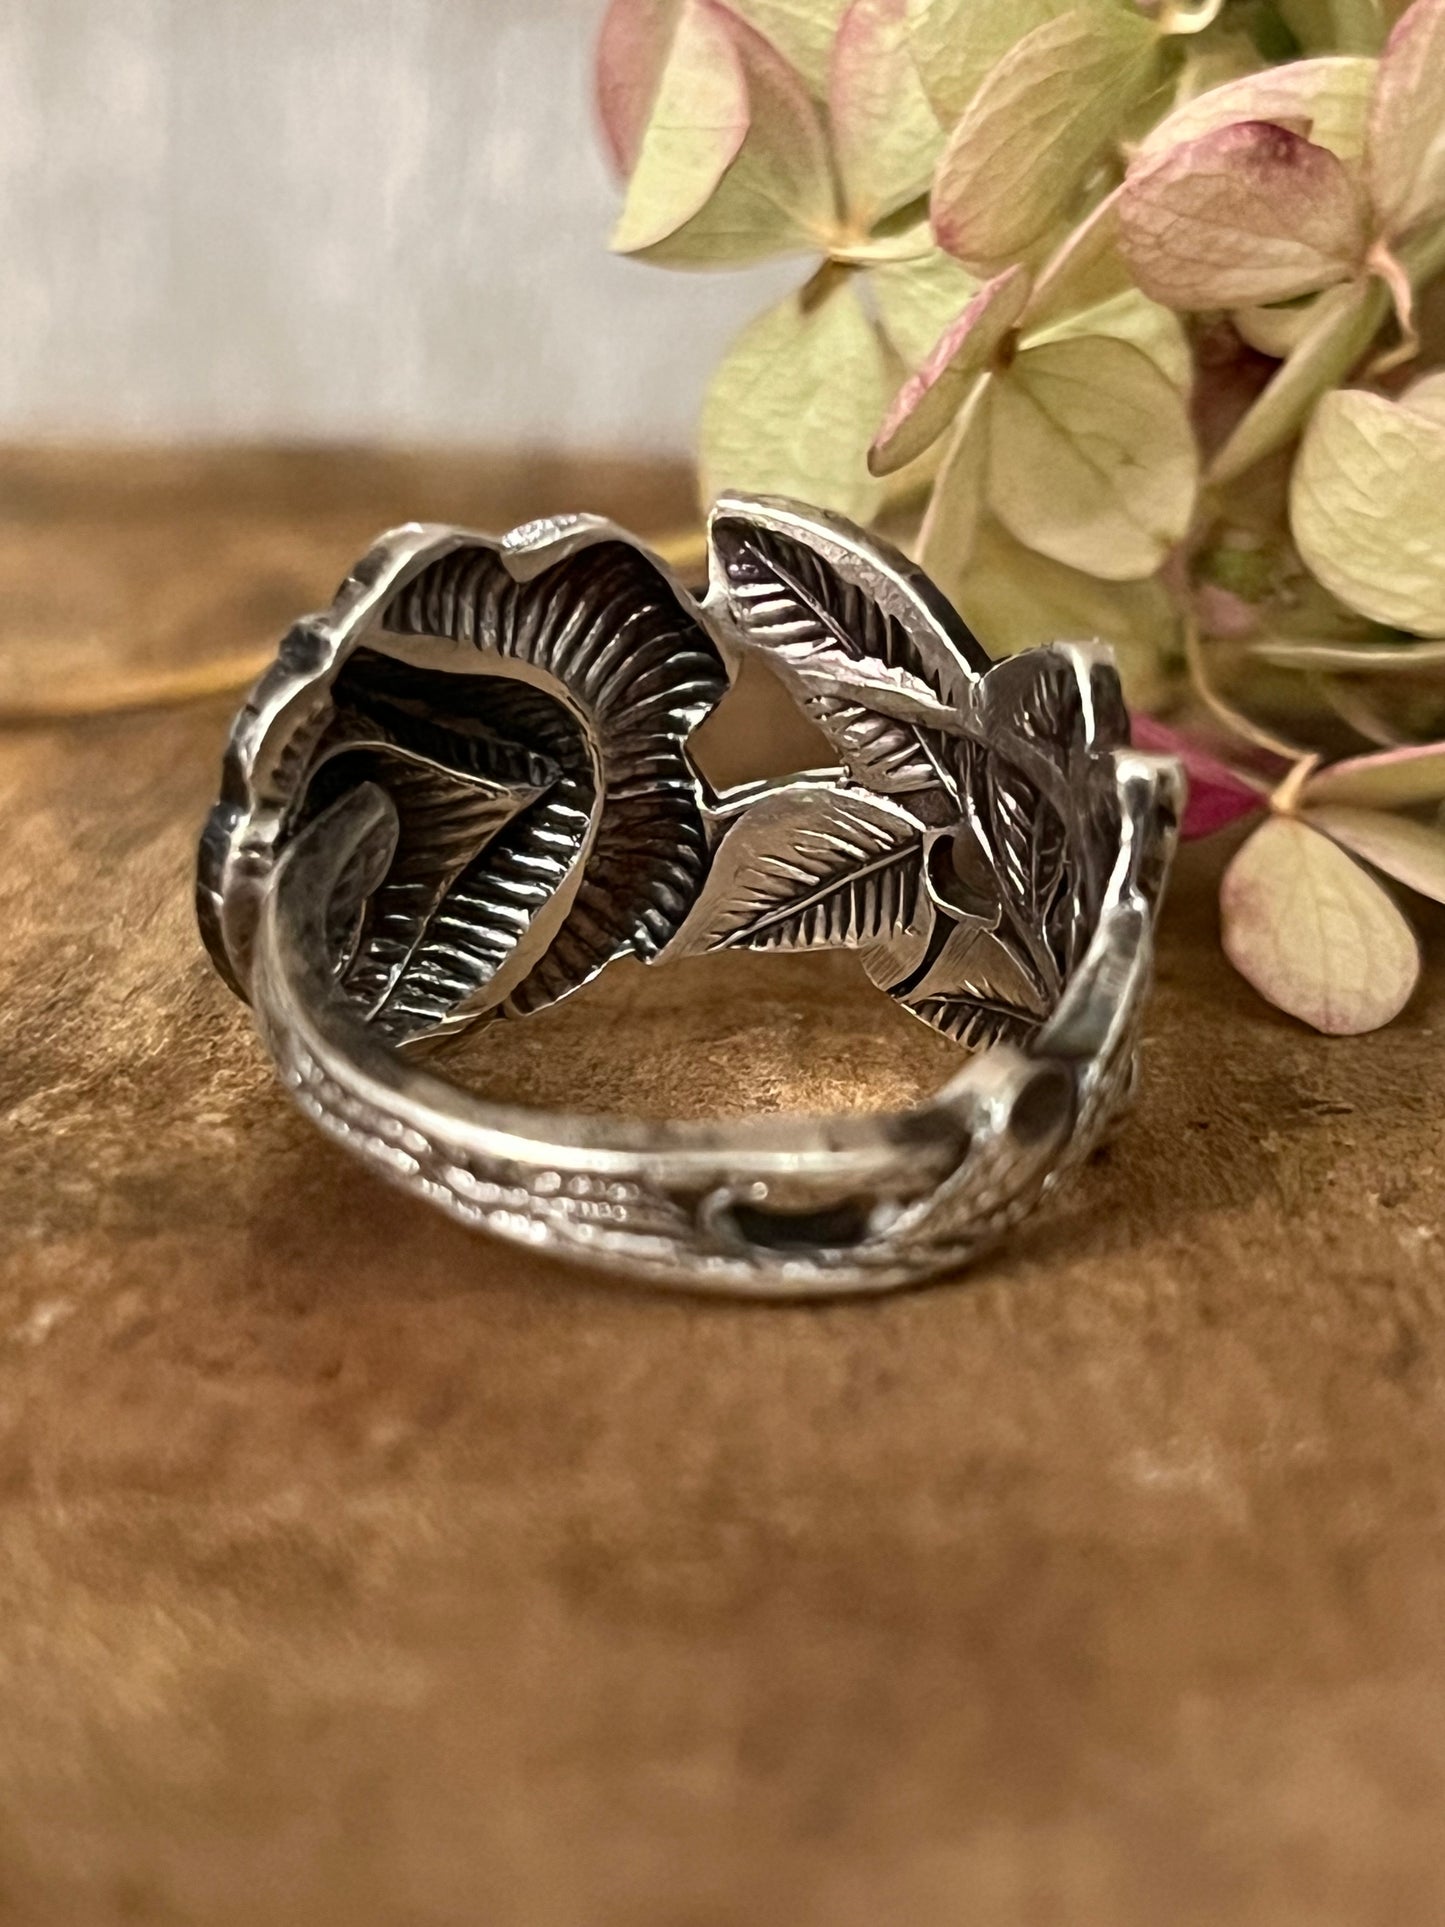 Hildesheim Rose- Antiko Silver plated DEMITASSE SPOON Ring - Vintage Mid Century from Germany